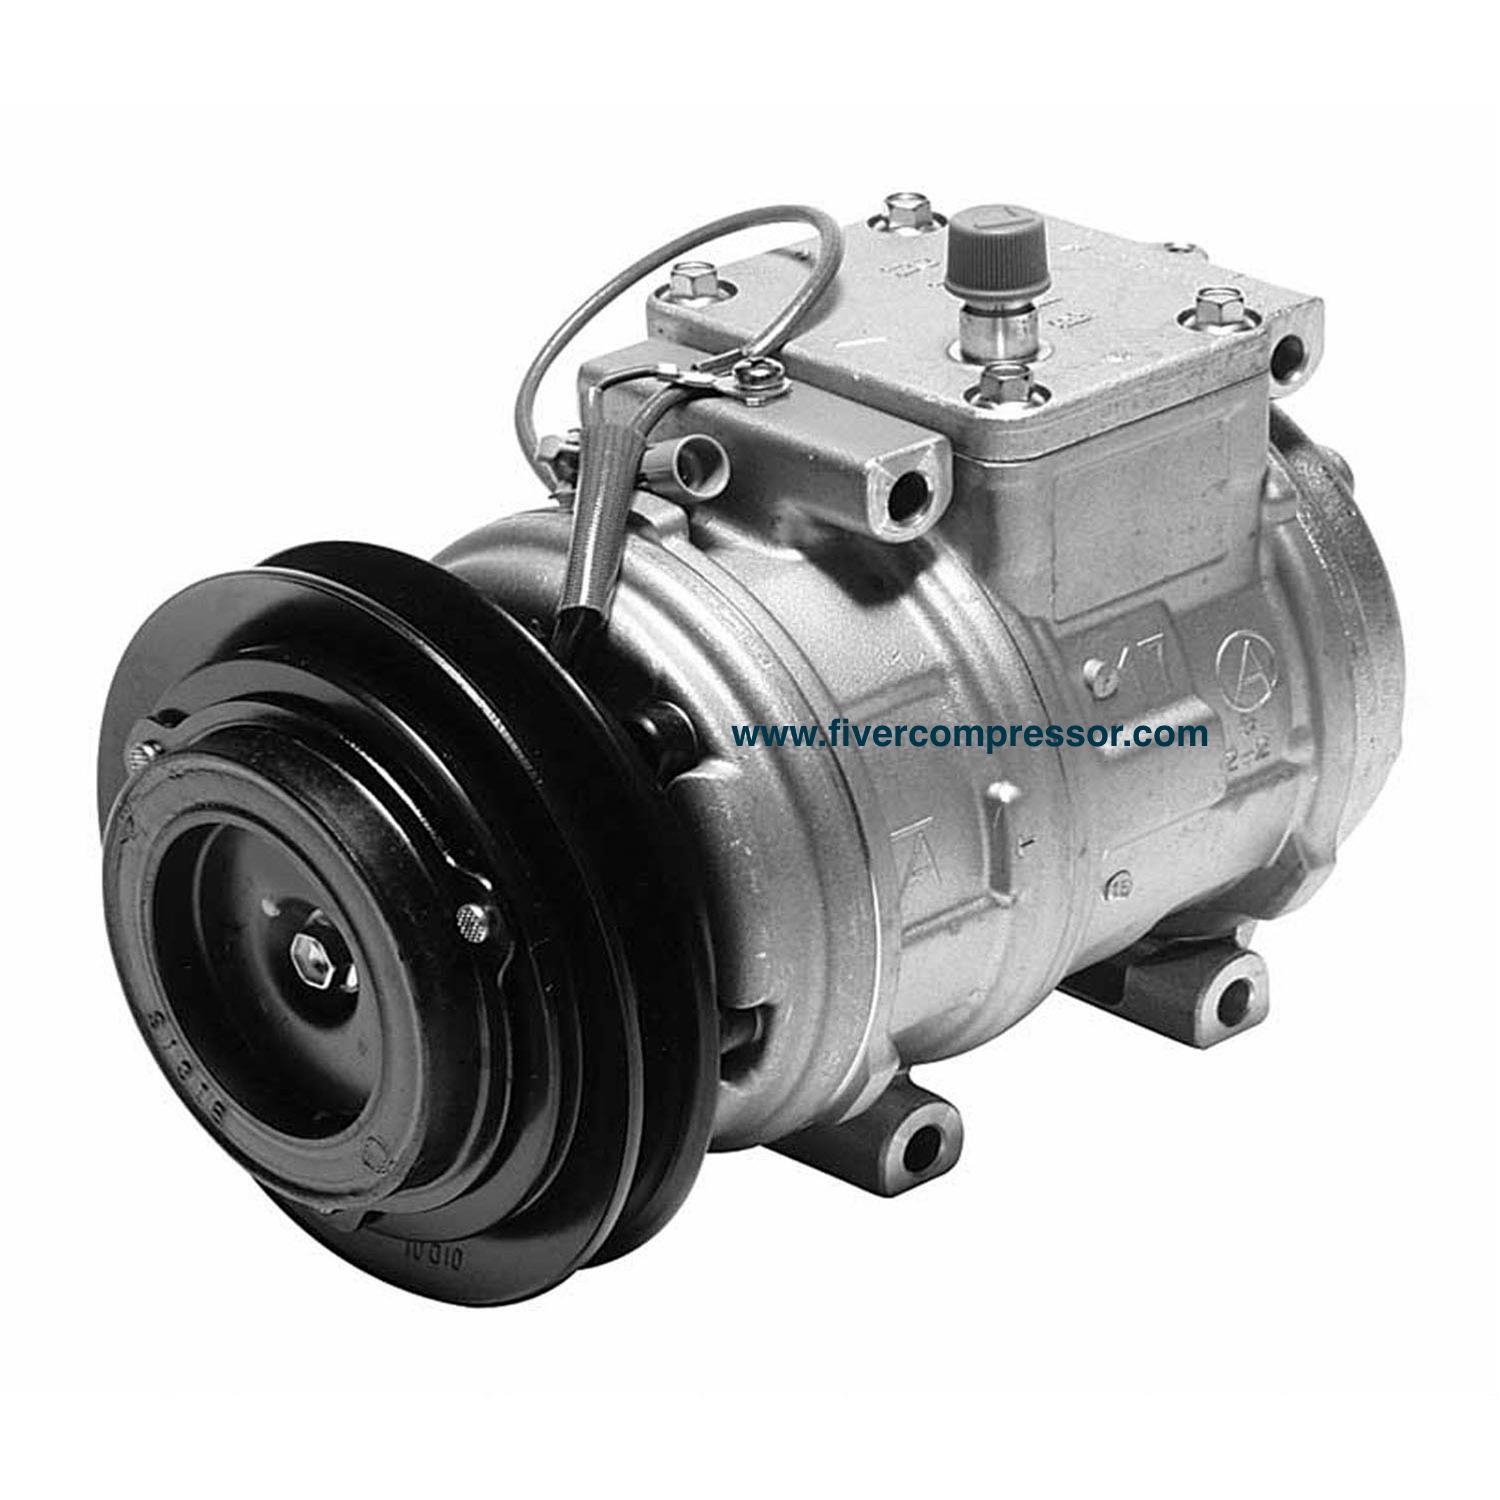 10PA17C A/C Compressor 4711166,8831060720,8832060580,88310-60720, 88320-60580 for Toyota <a href=http://www.fivercompressor.com/toyota-AC-compressor.html target='_blank'>Land Cruiser</a> FZJ80 L6 4.5L 1993-1997 and <a href=http://www.fivercompressor.com/toyota-AC-compressor.html target='_blank'>Lexus</a> LX450 FZJ80 1995-1998